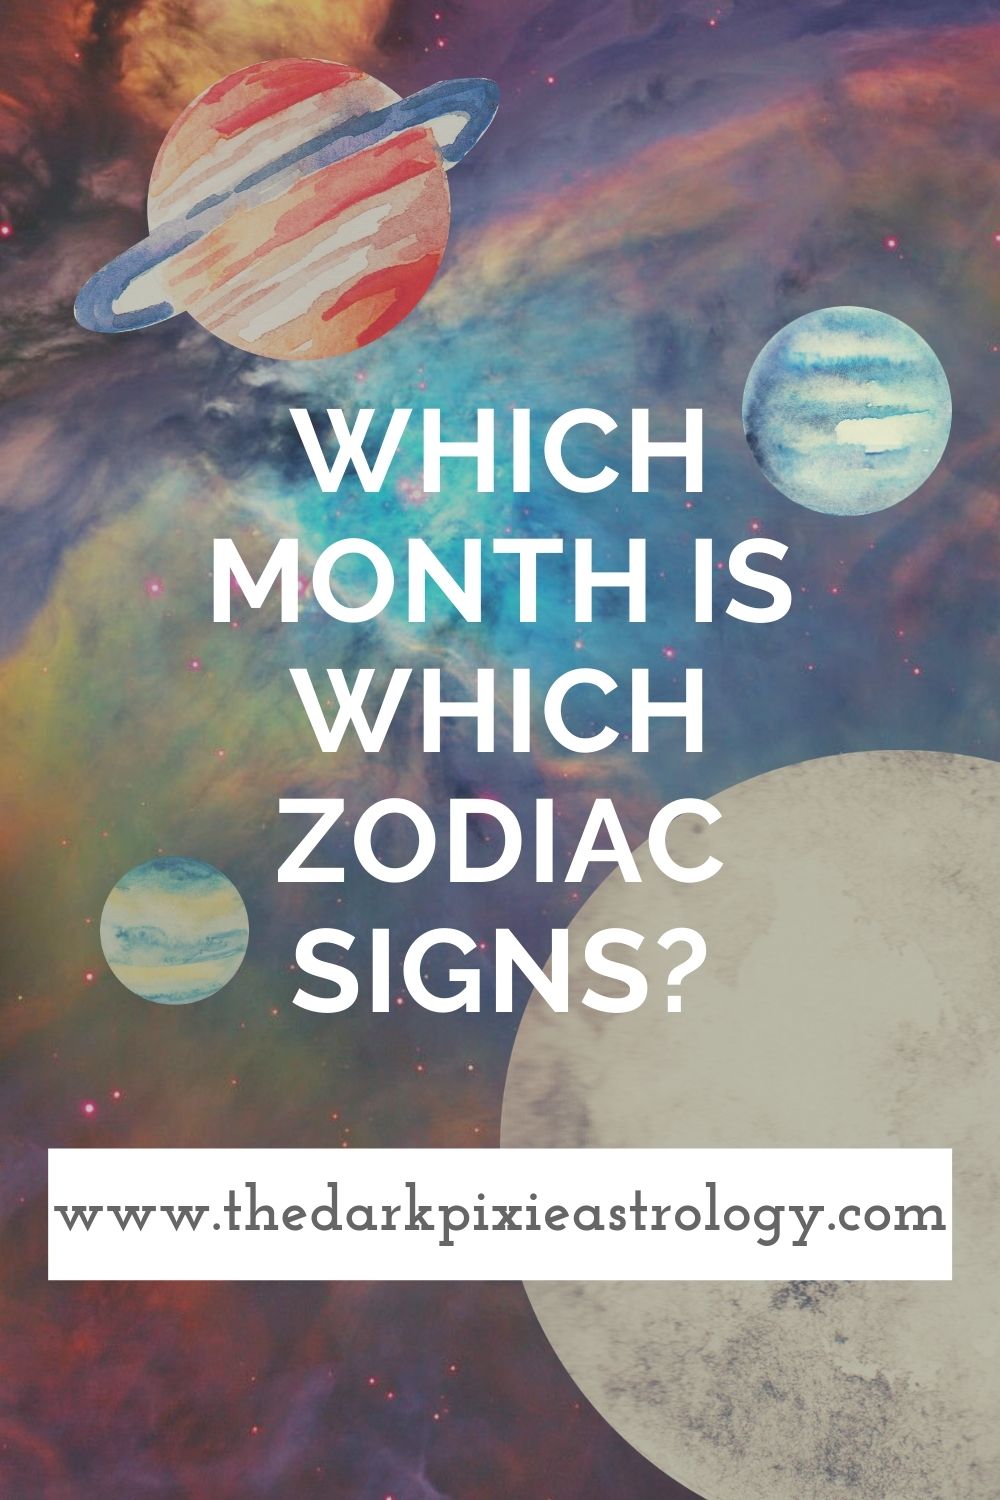 Which Month is Which Zodiac Signs? - The Dark Pixie Astrology